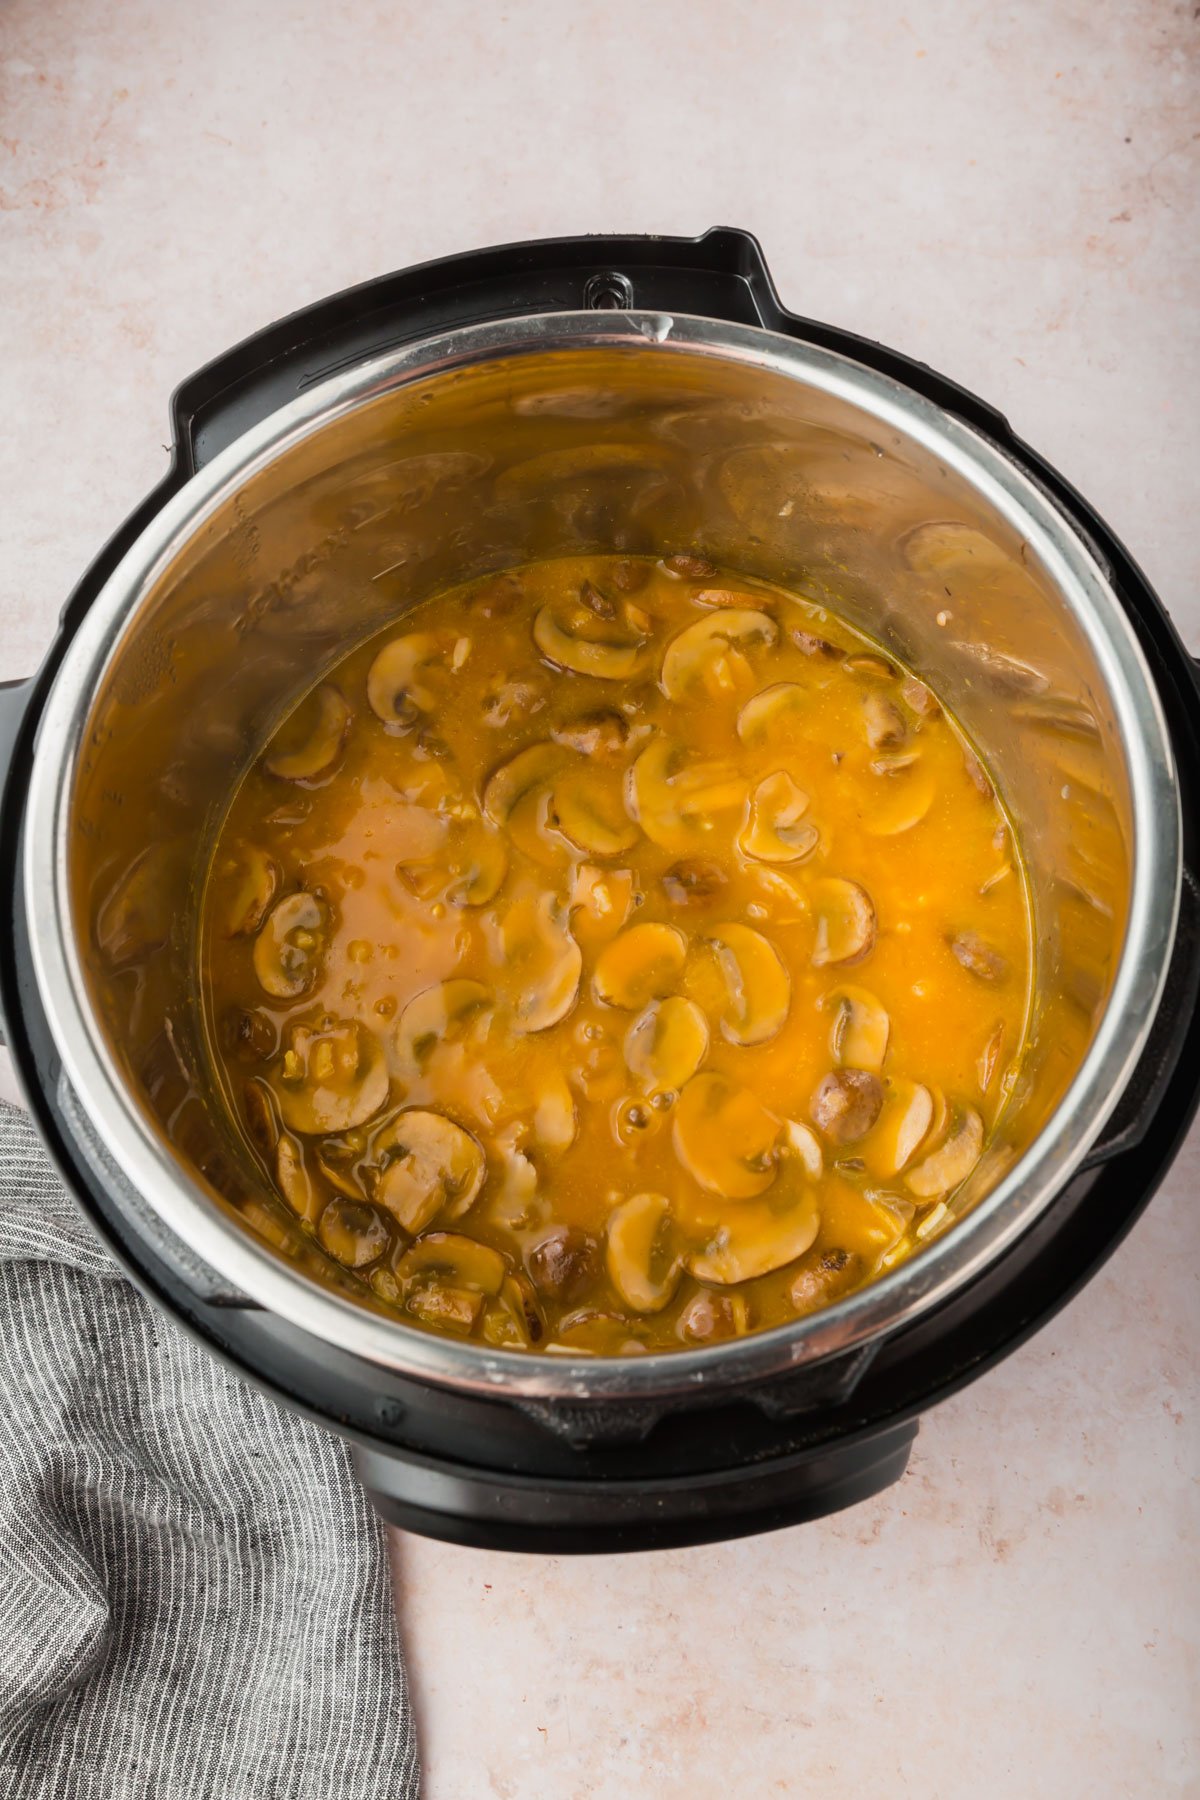 An Instant Pot filled with mushrooms in a mushroom broth.